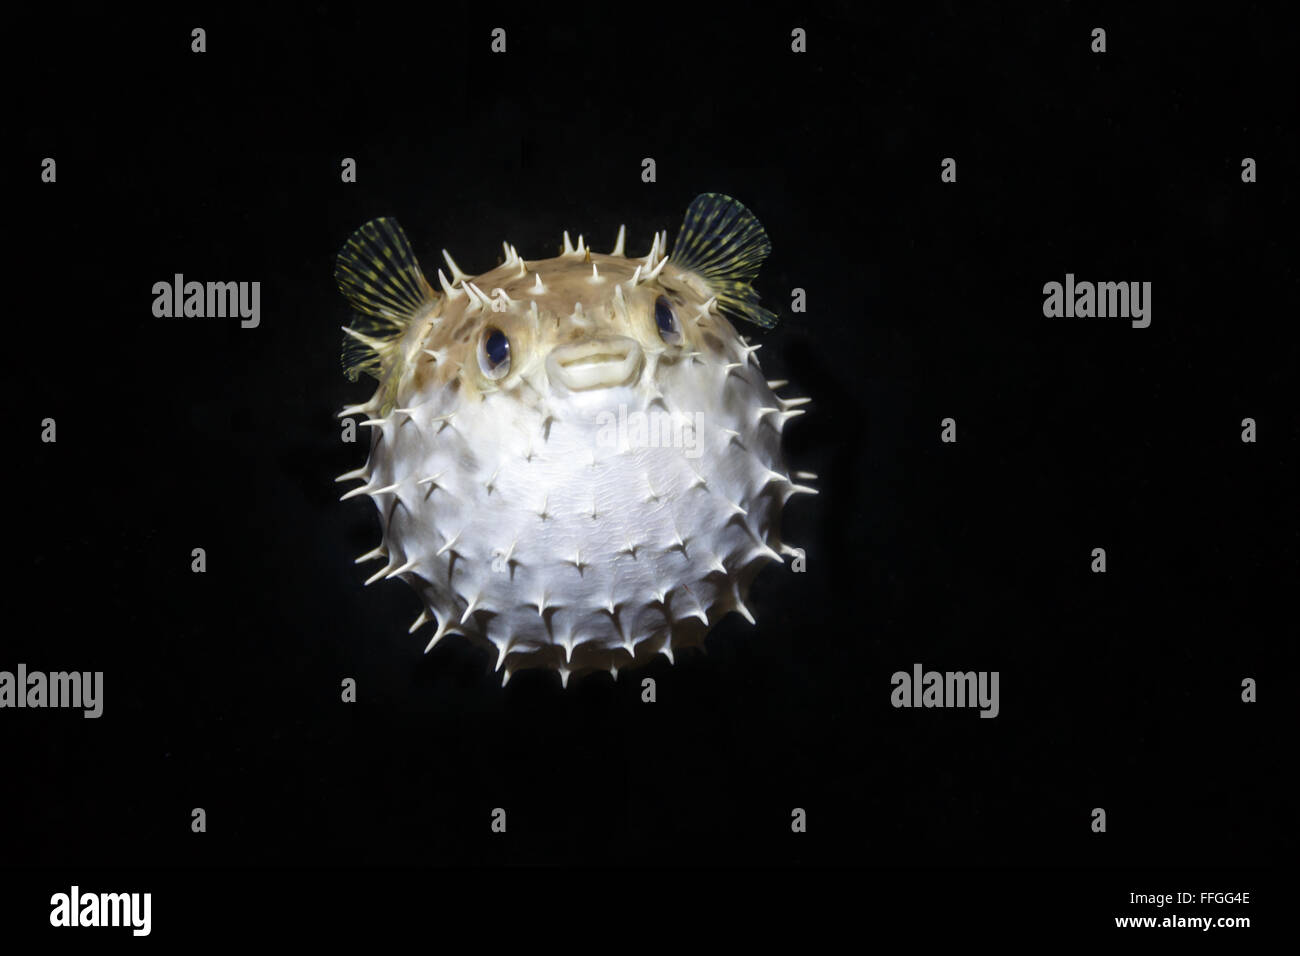 Balloon Puffer fish Diodon holocanthus puffed up at night floating in the dark balke ocean Stock Photo